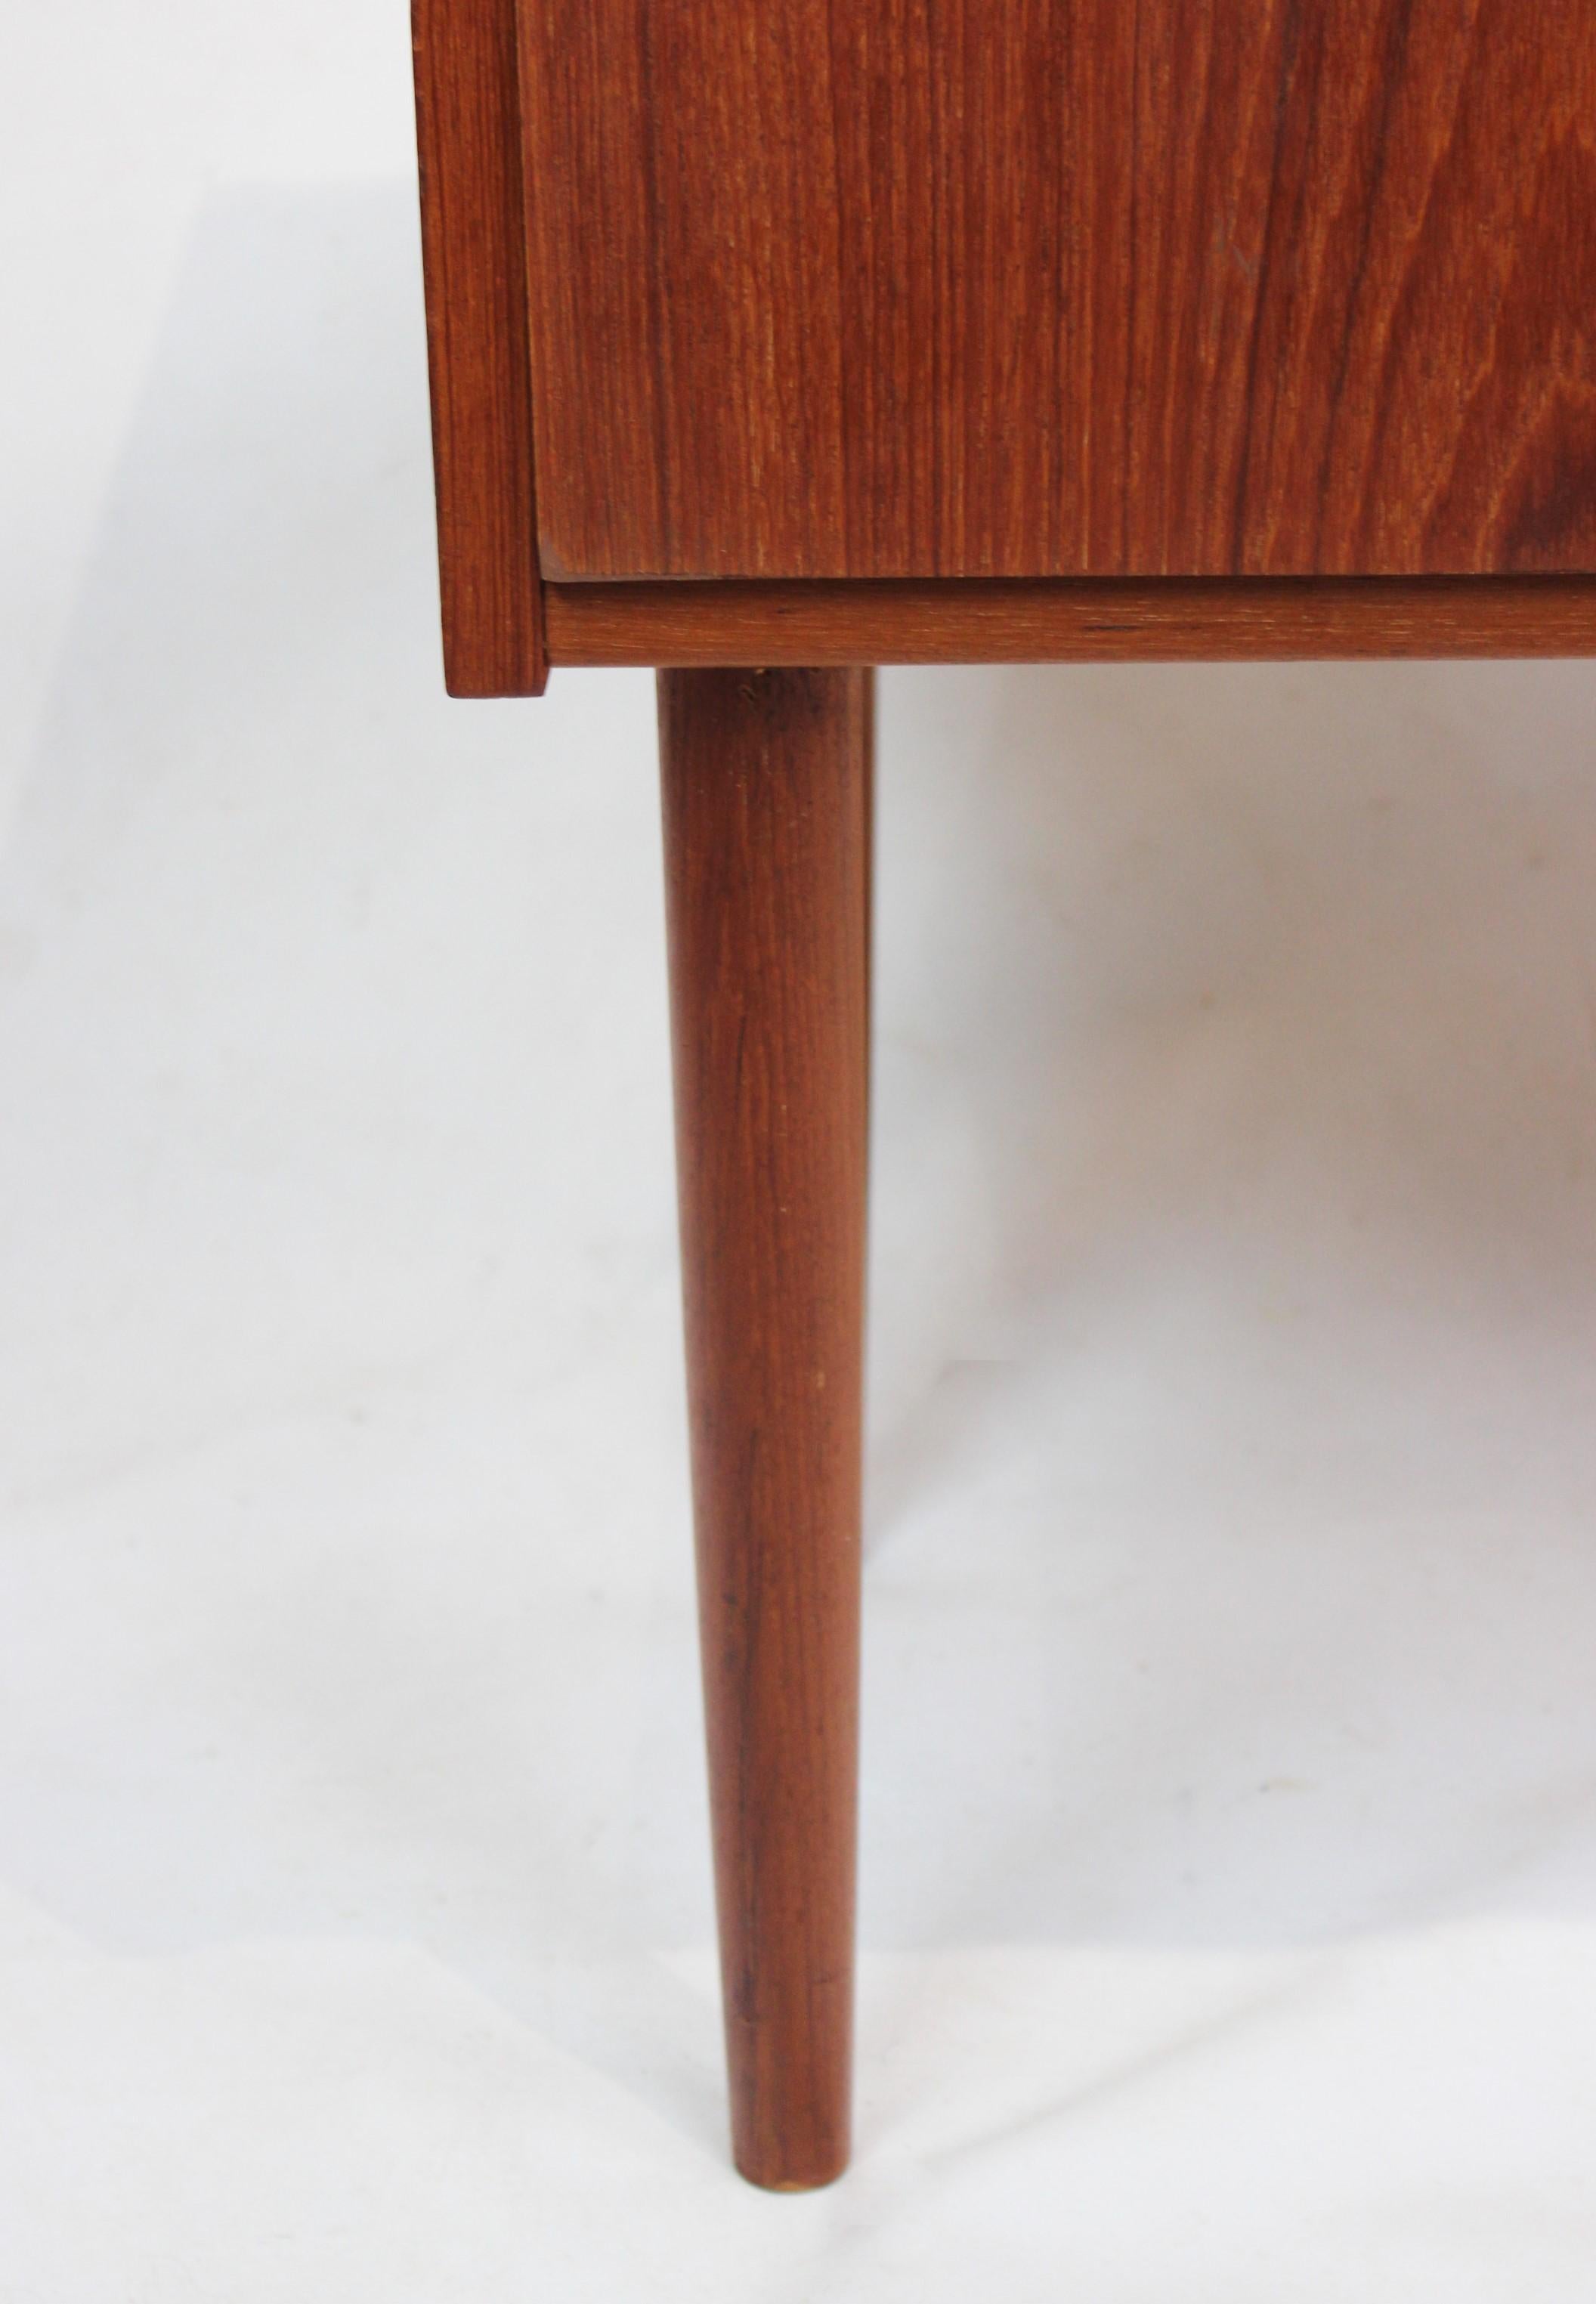 Scandinavian Modern Small Chest of Drawers in Teak of Danish Design from the 1960s For Sale